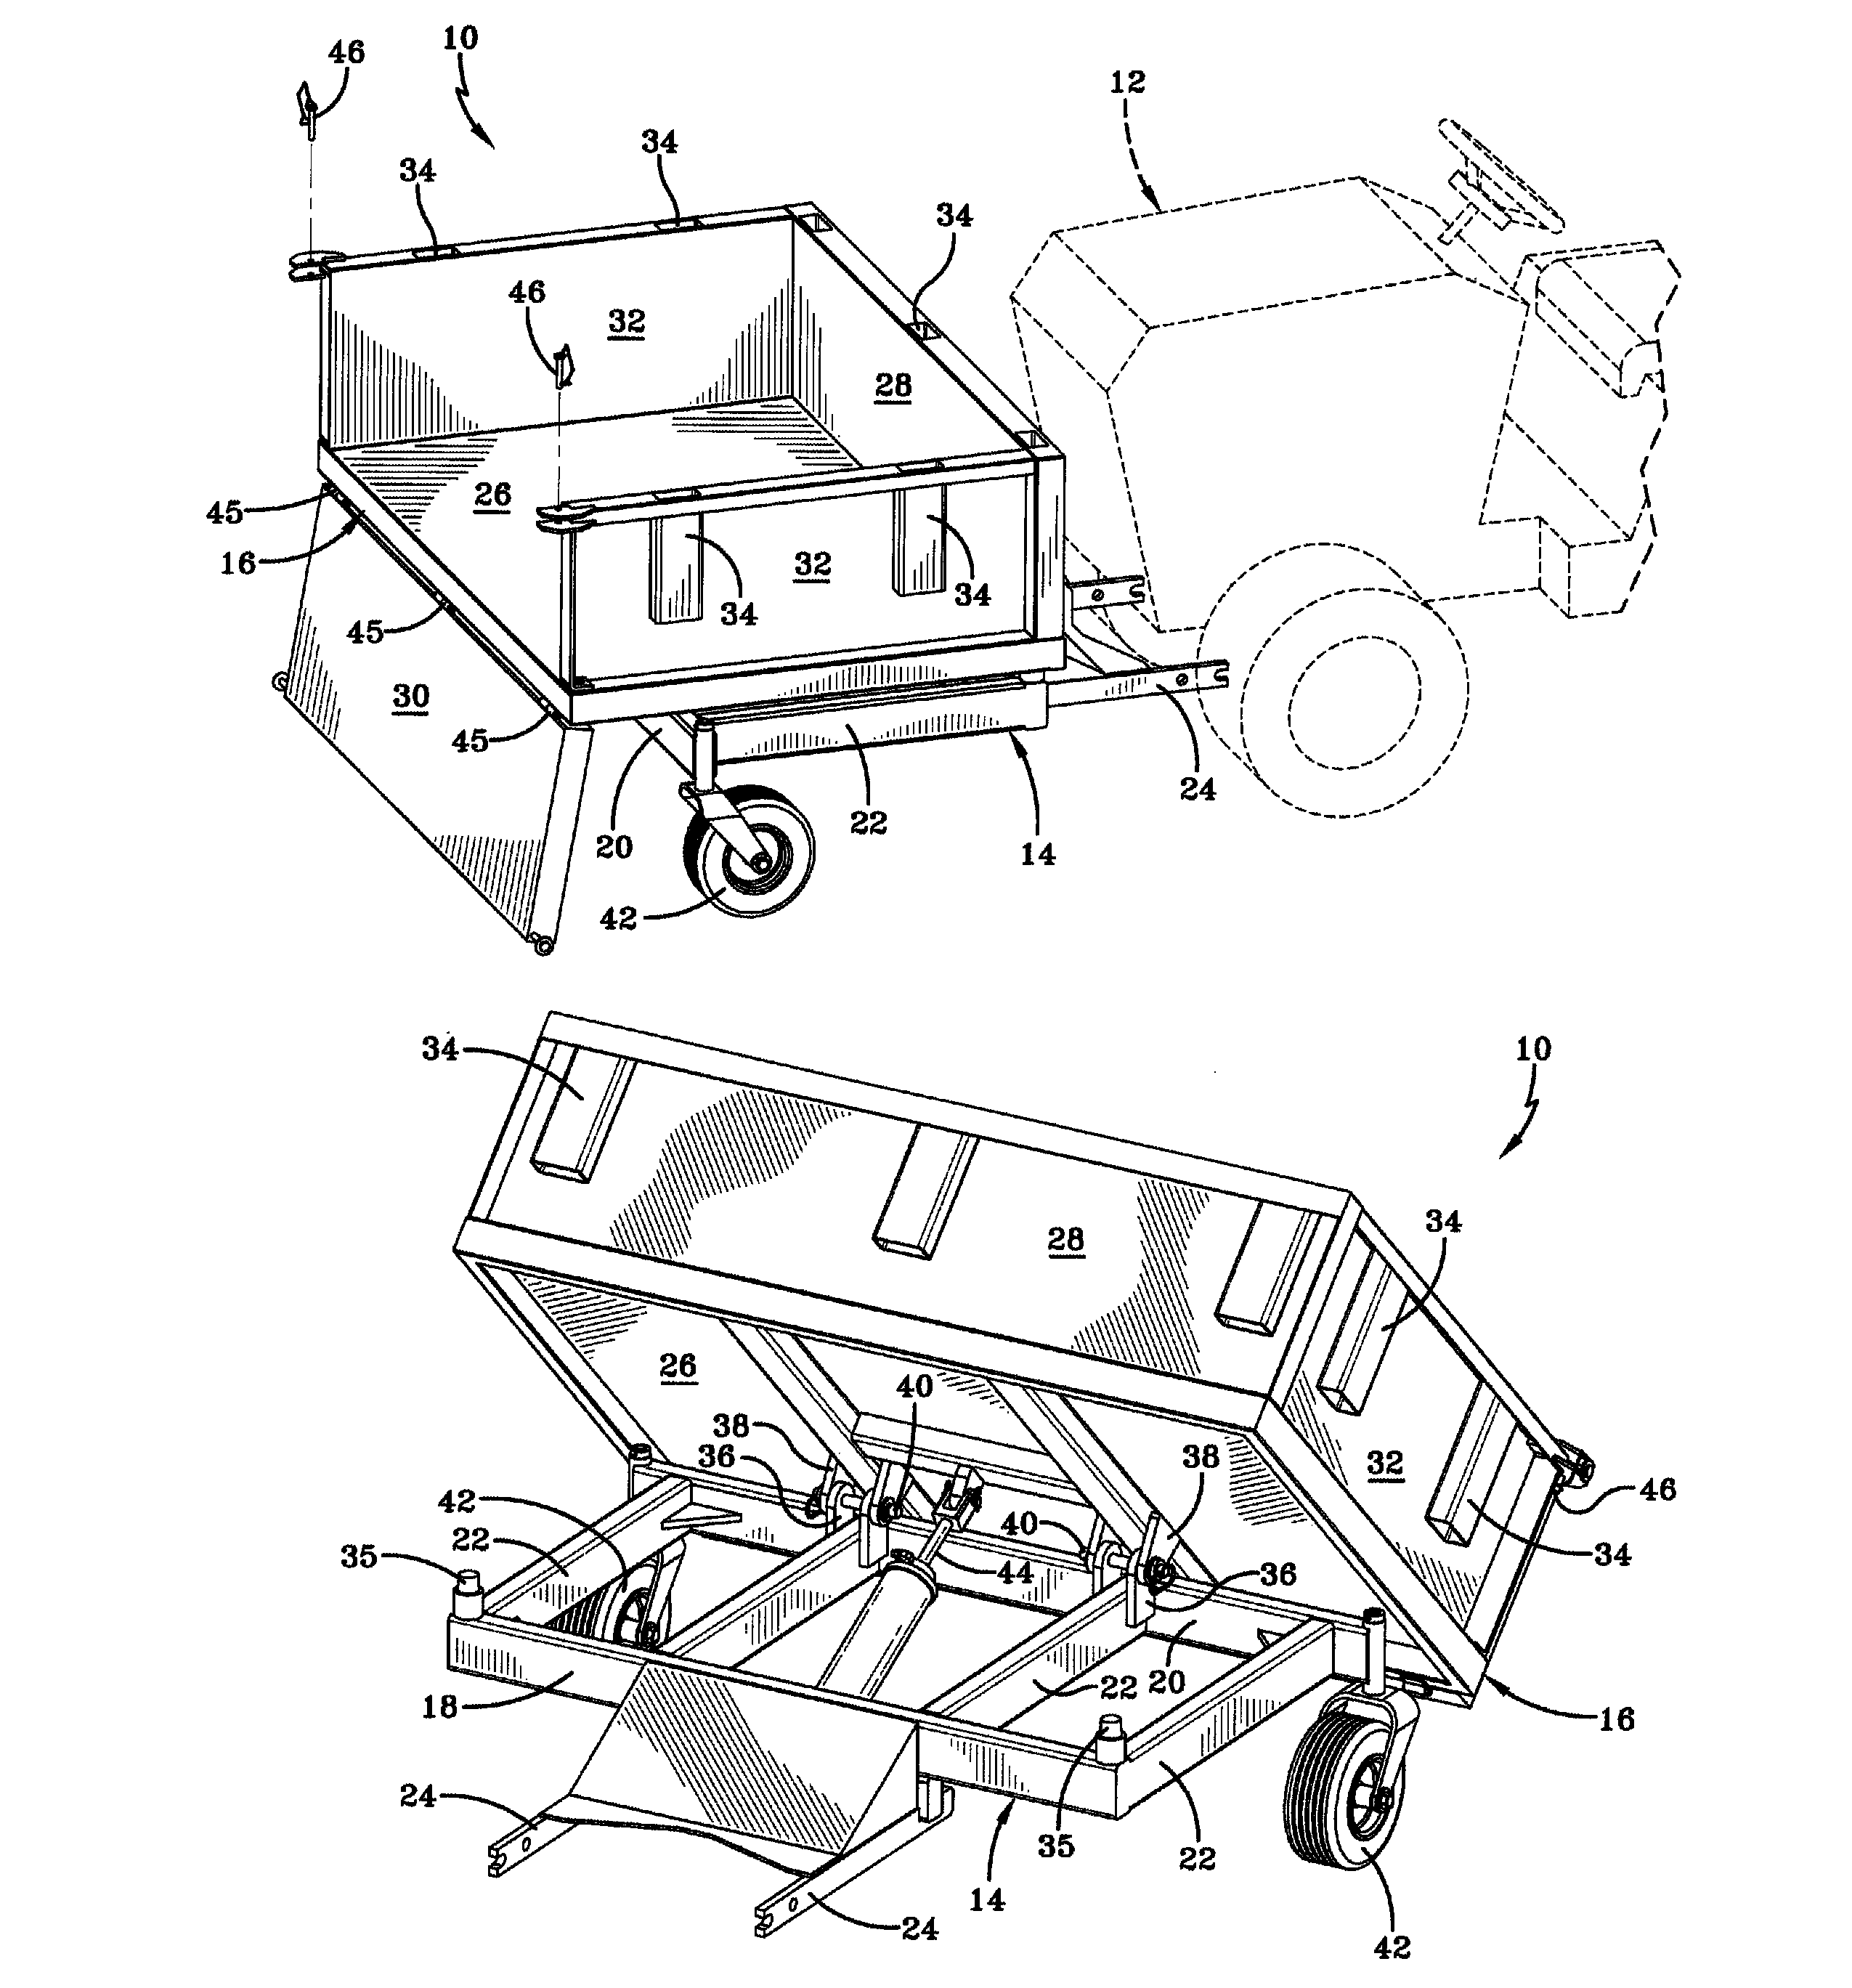 Cargo hauling attachment for a tractor